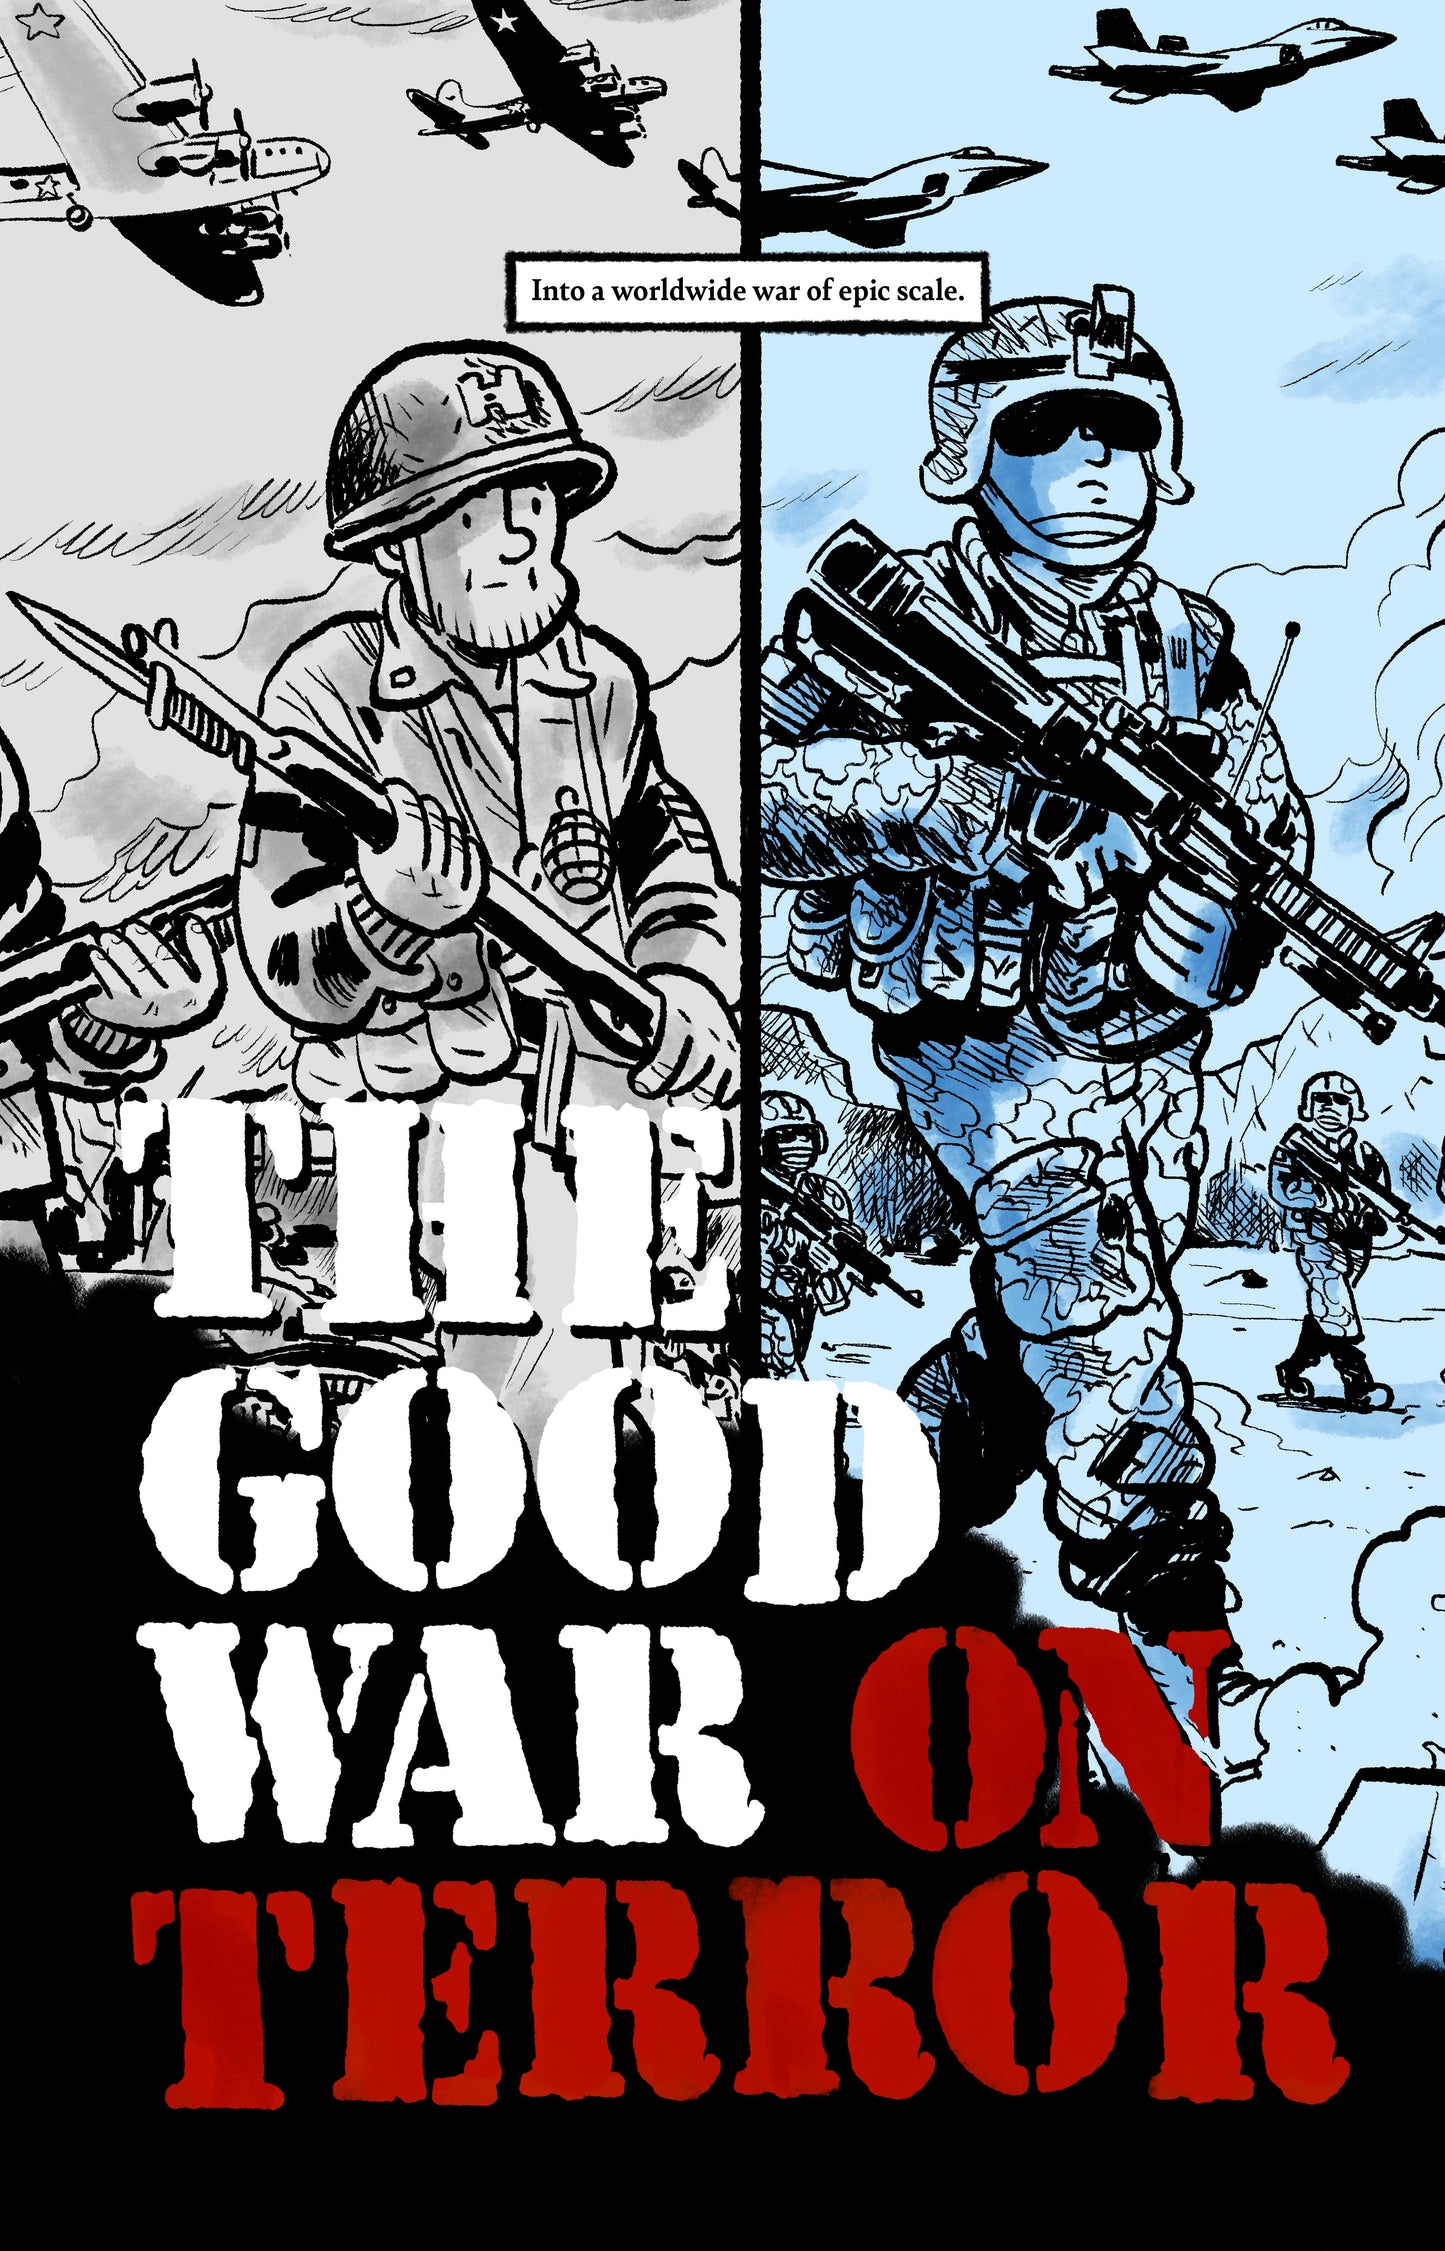 THE GOOD WAR ON TERROR - WRITTEN BY CHRISTOPHER HAYES